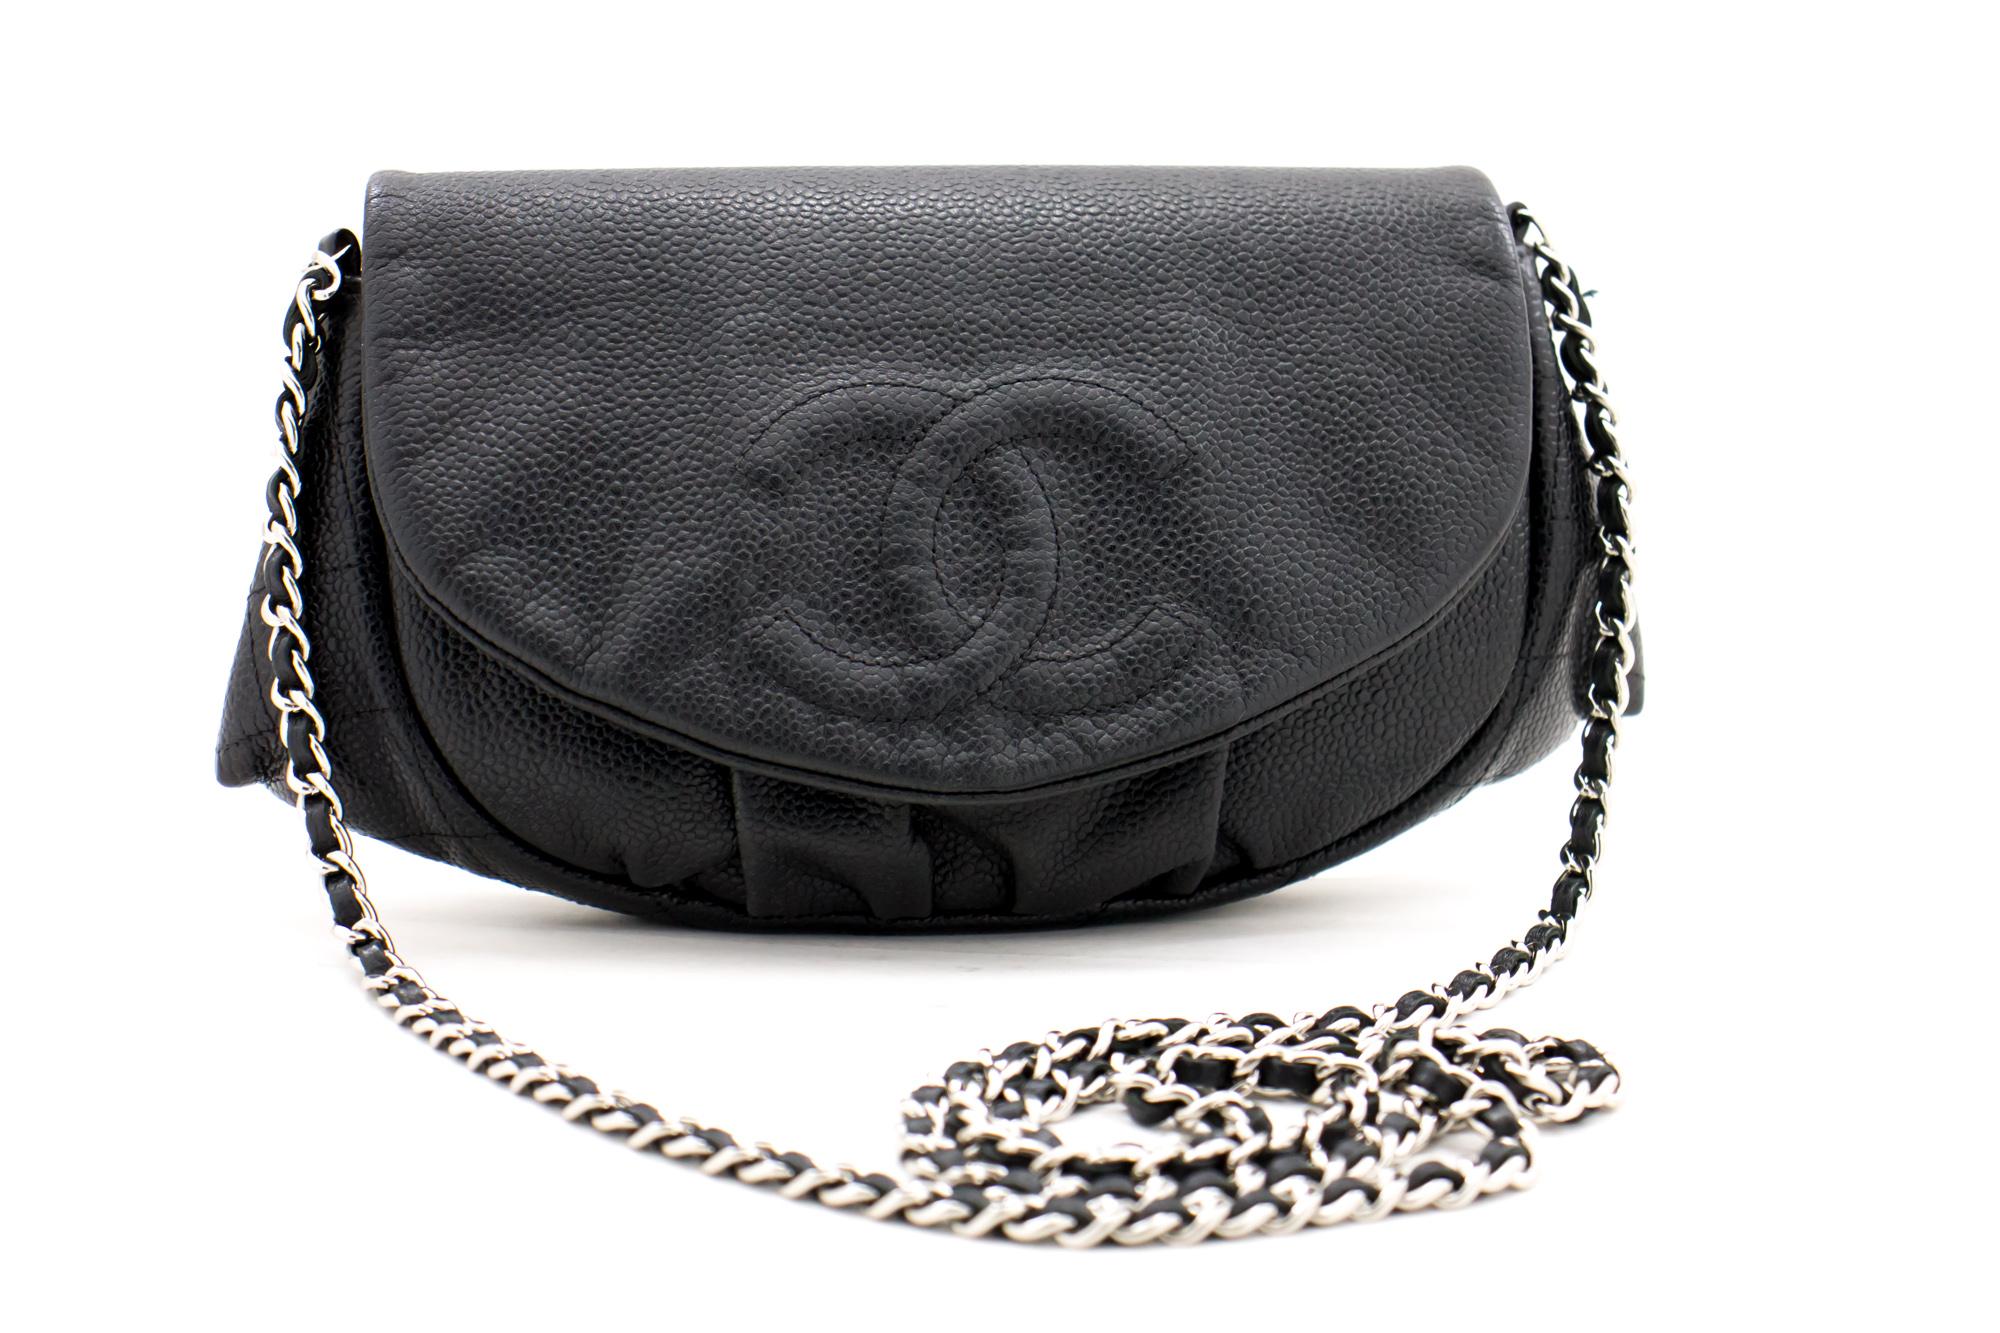 An authentic CHANEL Caviar Half Moon WOC Black Wallet On Chain Clutch Shoulder. The color is Black. The outside material is Leather. The pattern is Solid. This item is Contemporary. The year of manufacture would be 2012.
Conditions & Ratings
Outside